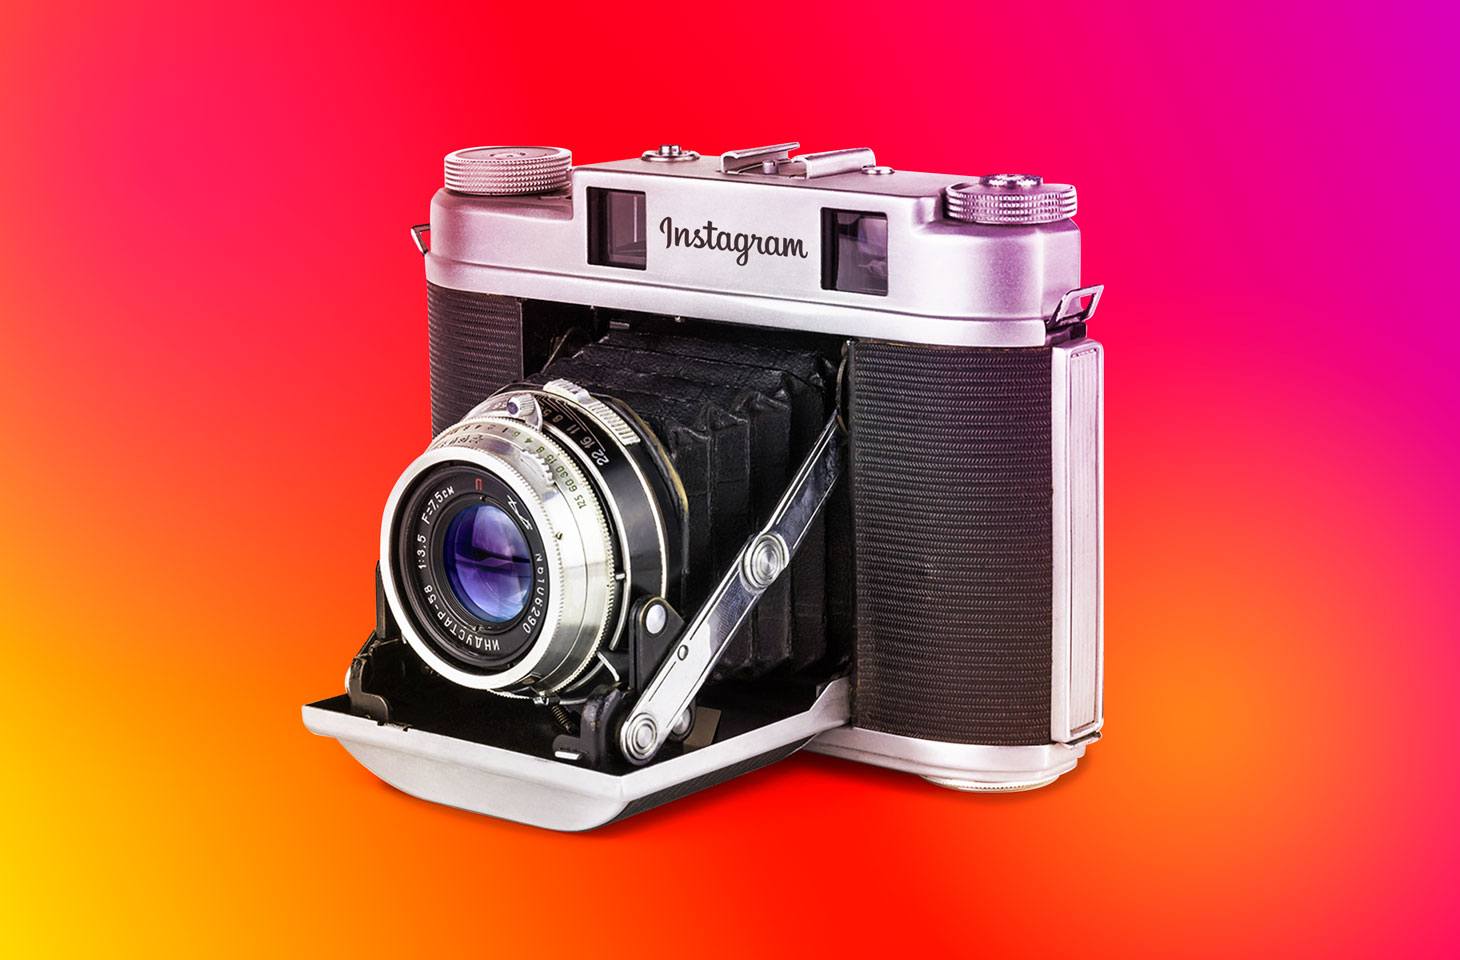 What are the benefits of buying instant Instagram?